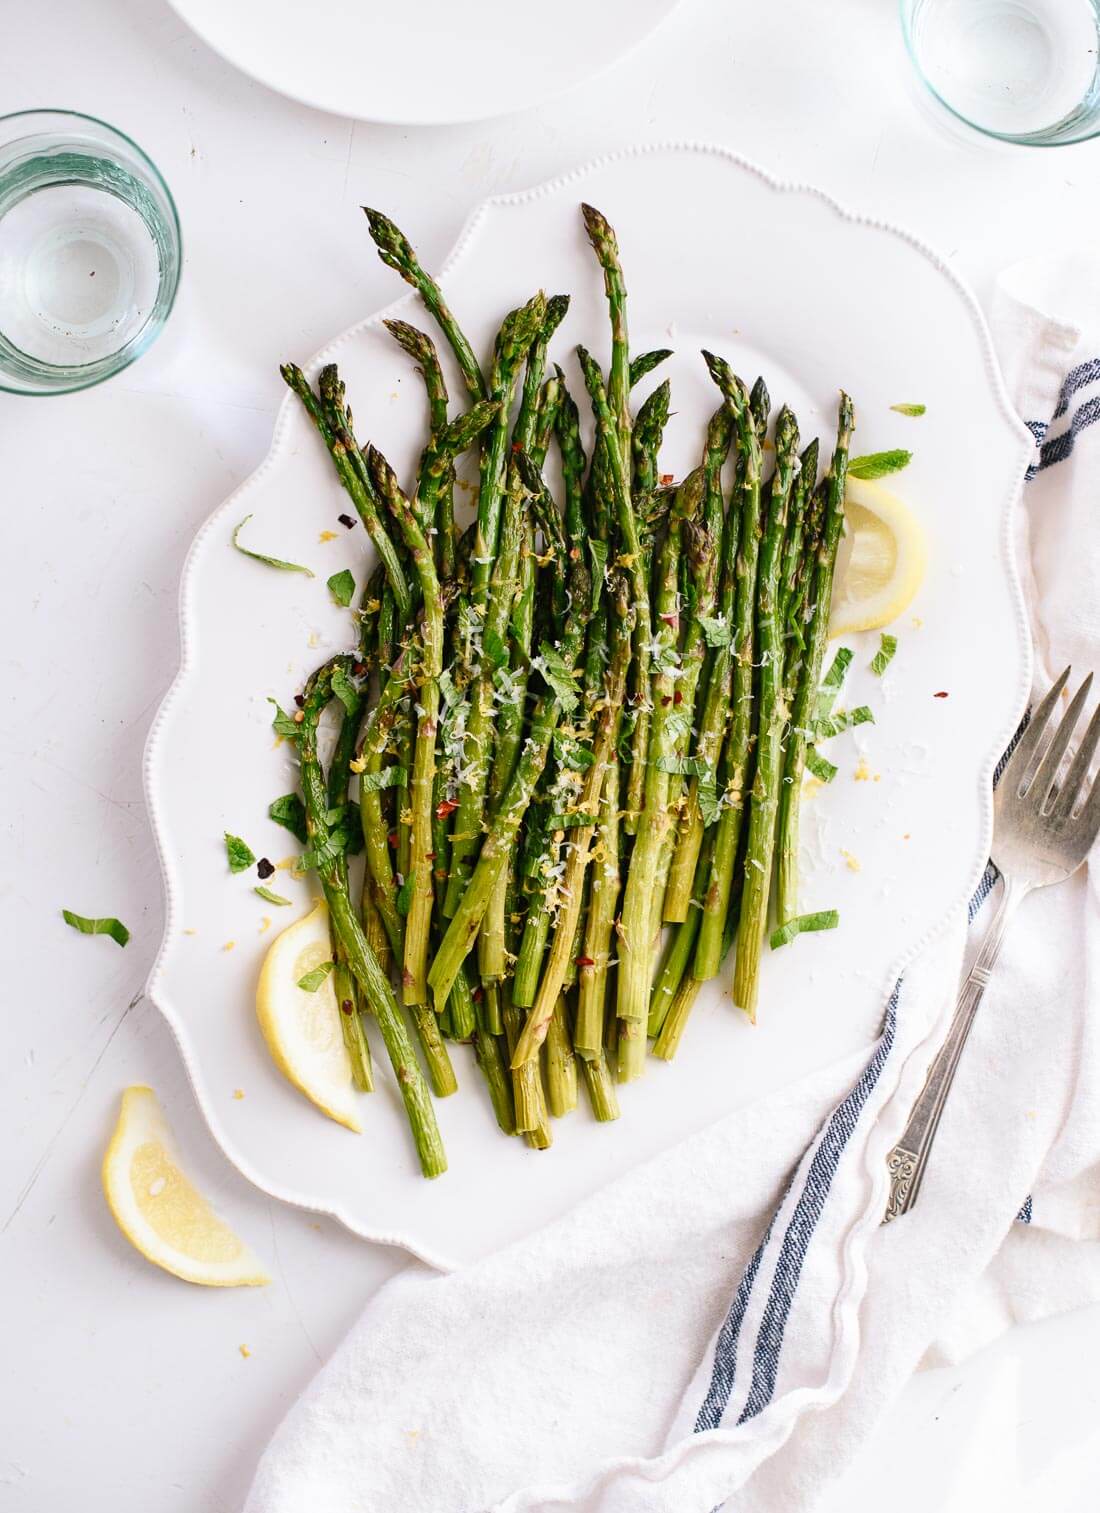 Simple roasted asparagus recipe (the perfect spring side dish!) - cookieandkate.com